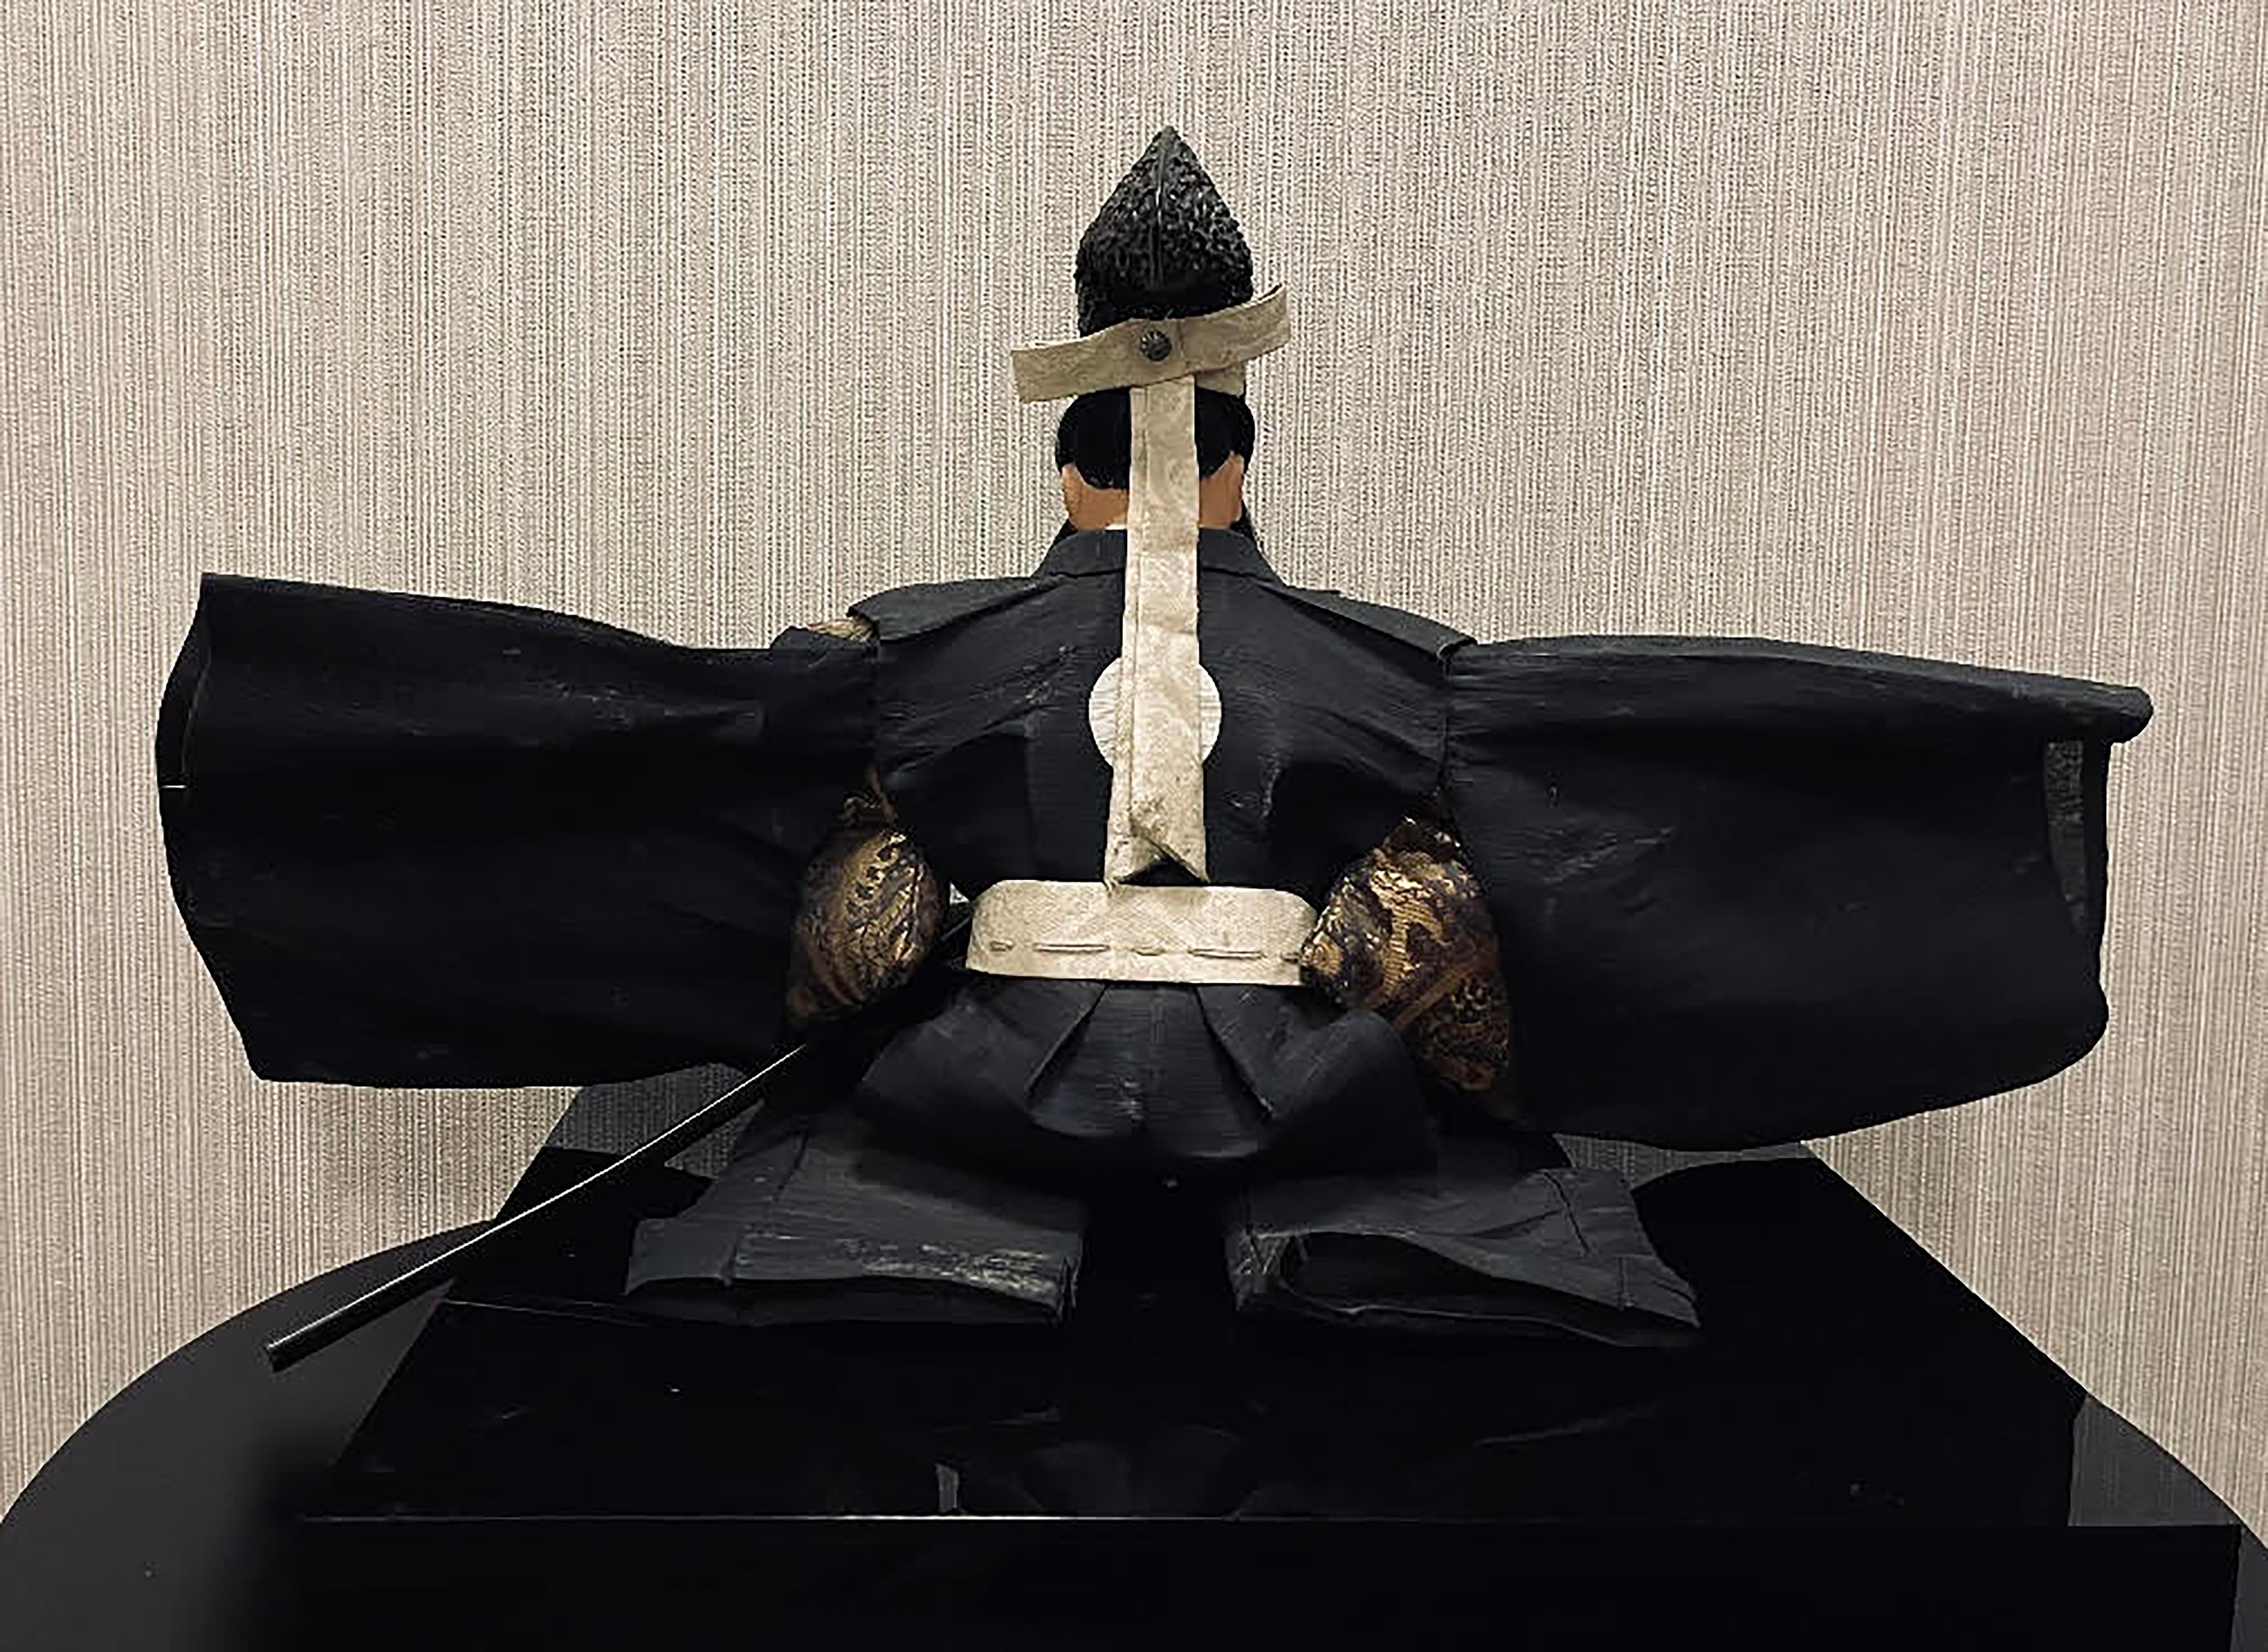 Japanese Samurai Boys Day Doll (Musha Ningyo) of Kato, wearing a rare spectacular court robe sporting his family crest. Early Meiji period samurai Ningyo doll of Kato Kiyomasa. He has beautify carved wood, a powerful face. Presented on a black